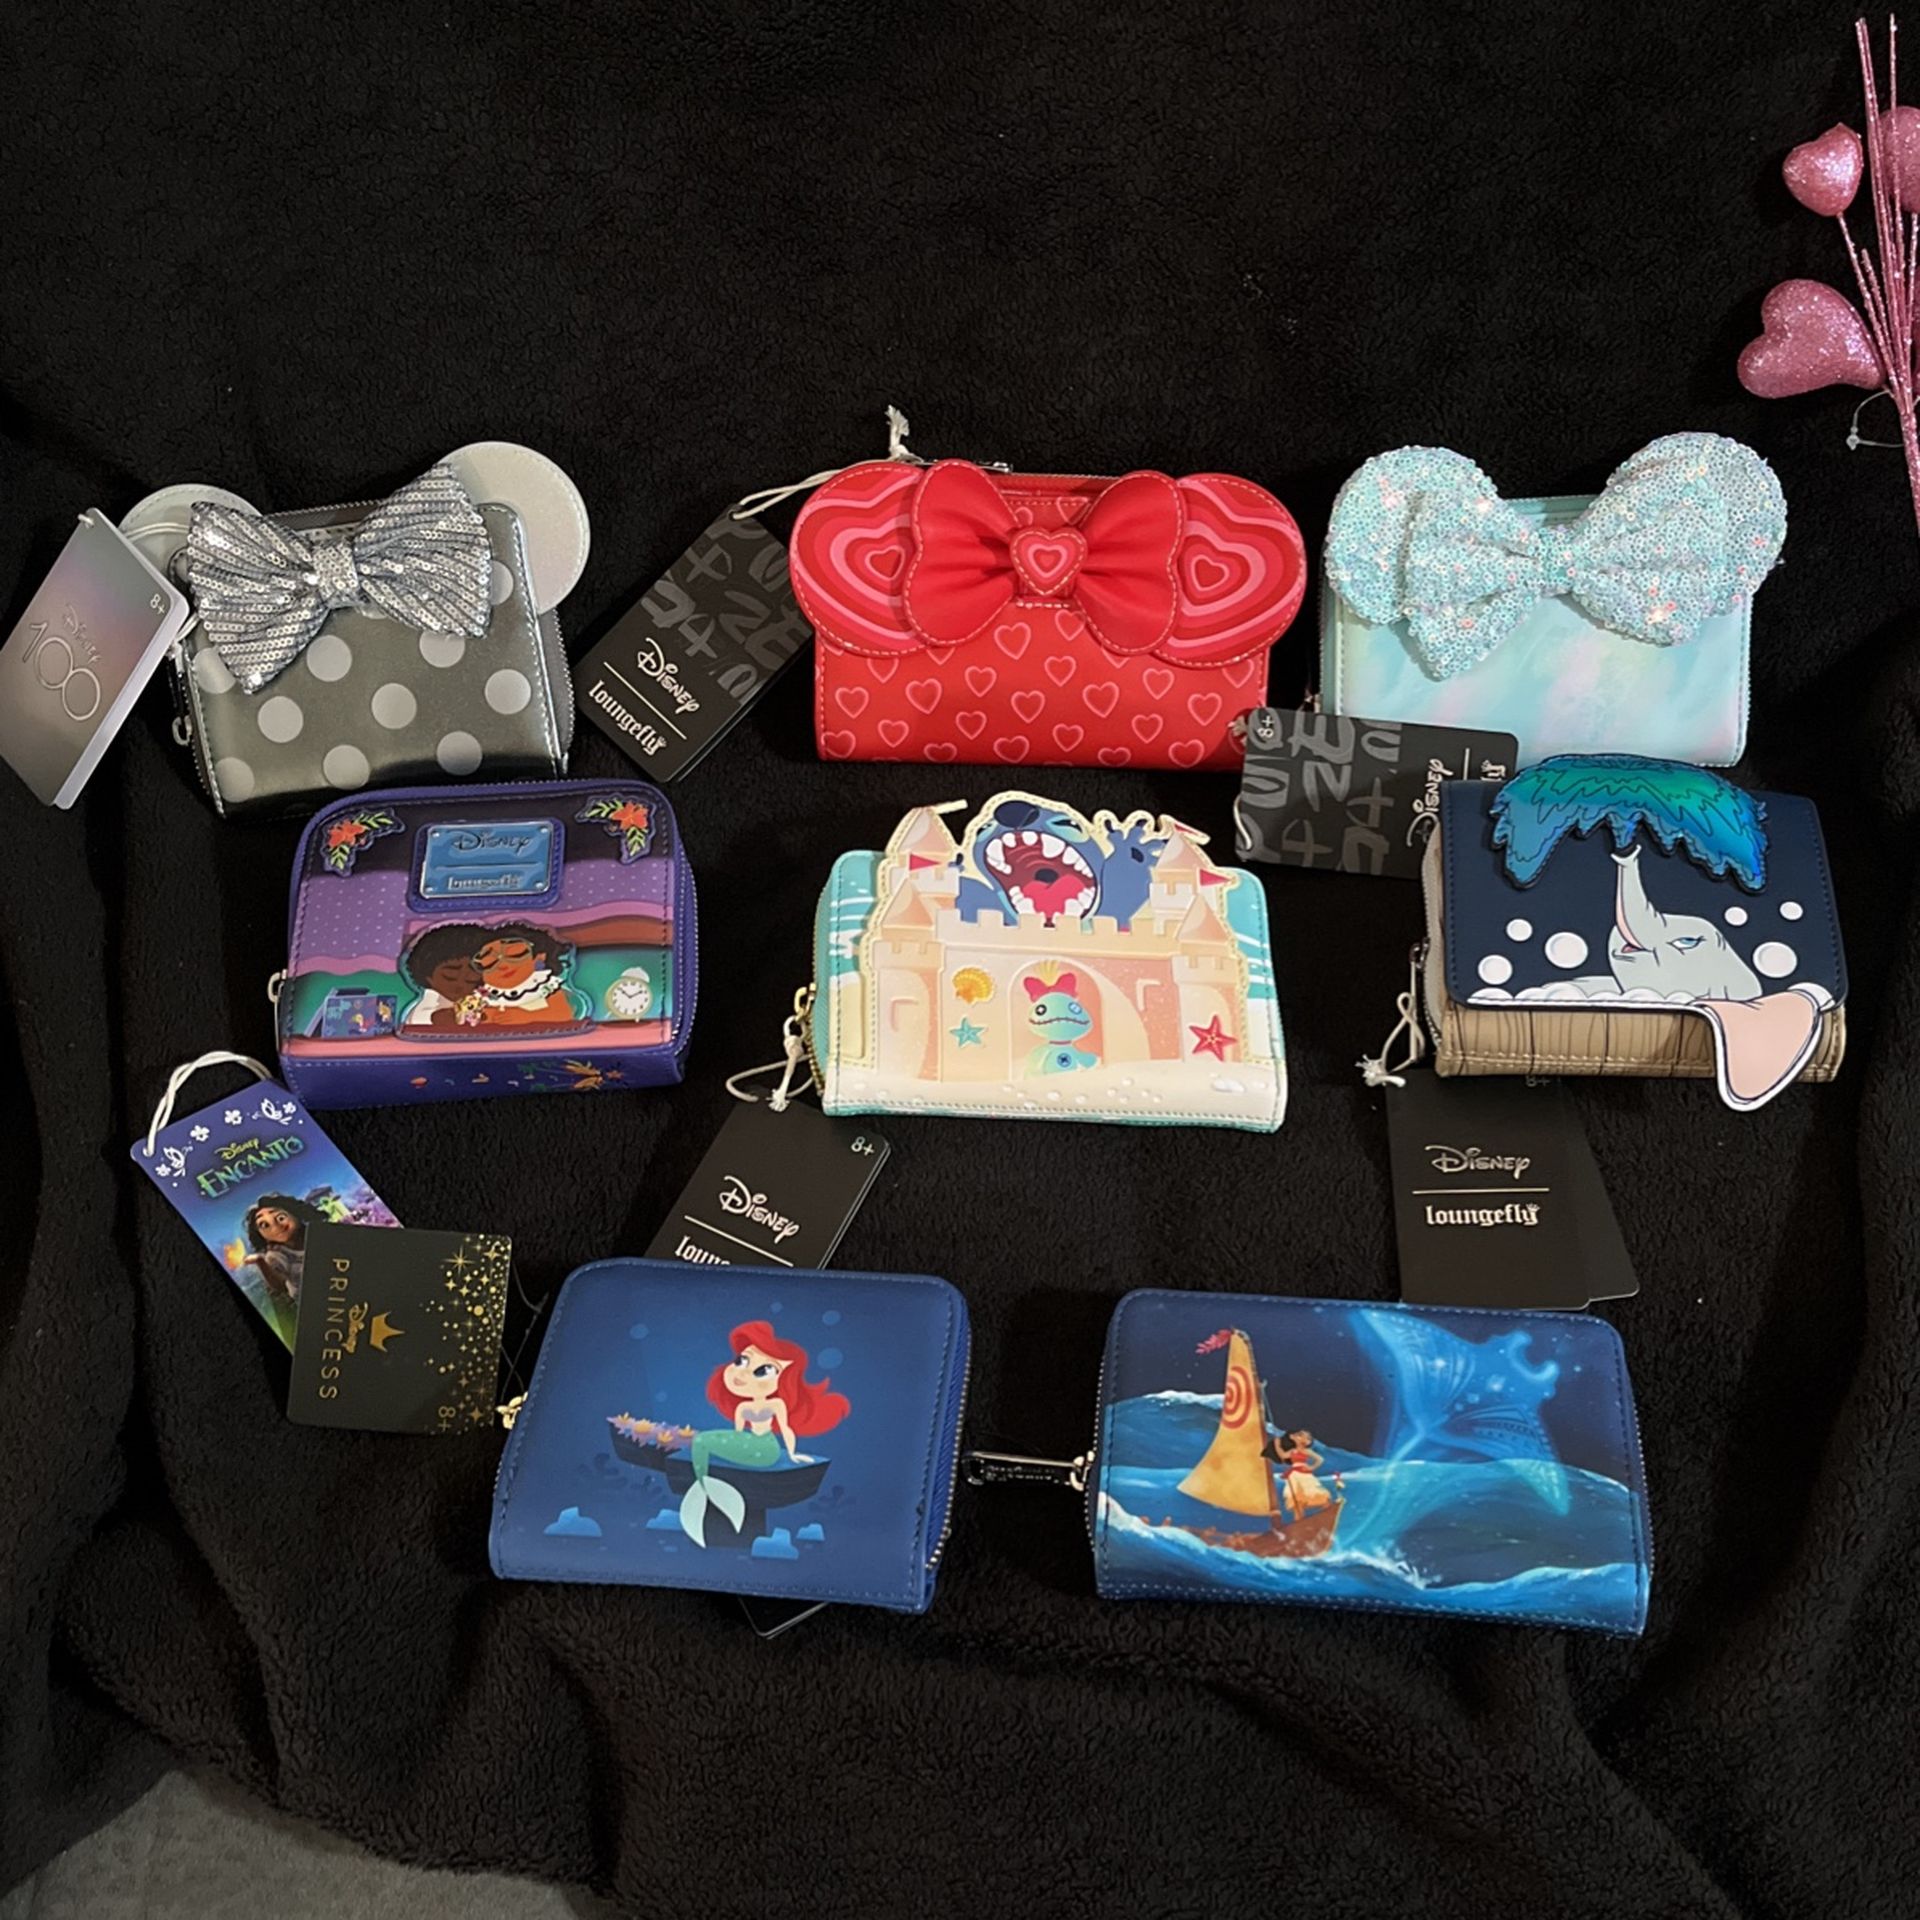 Disney Loungefly Wallets $40 EACH! (Price Is Firm) Perfect for Mothers Day /Grad,add Gift  Card 💐❤️More In Profile 😎